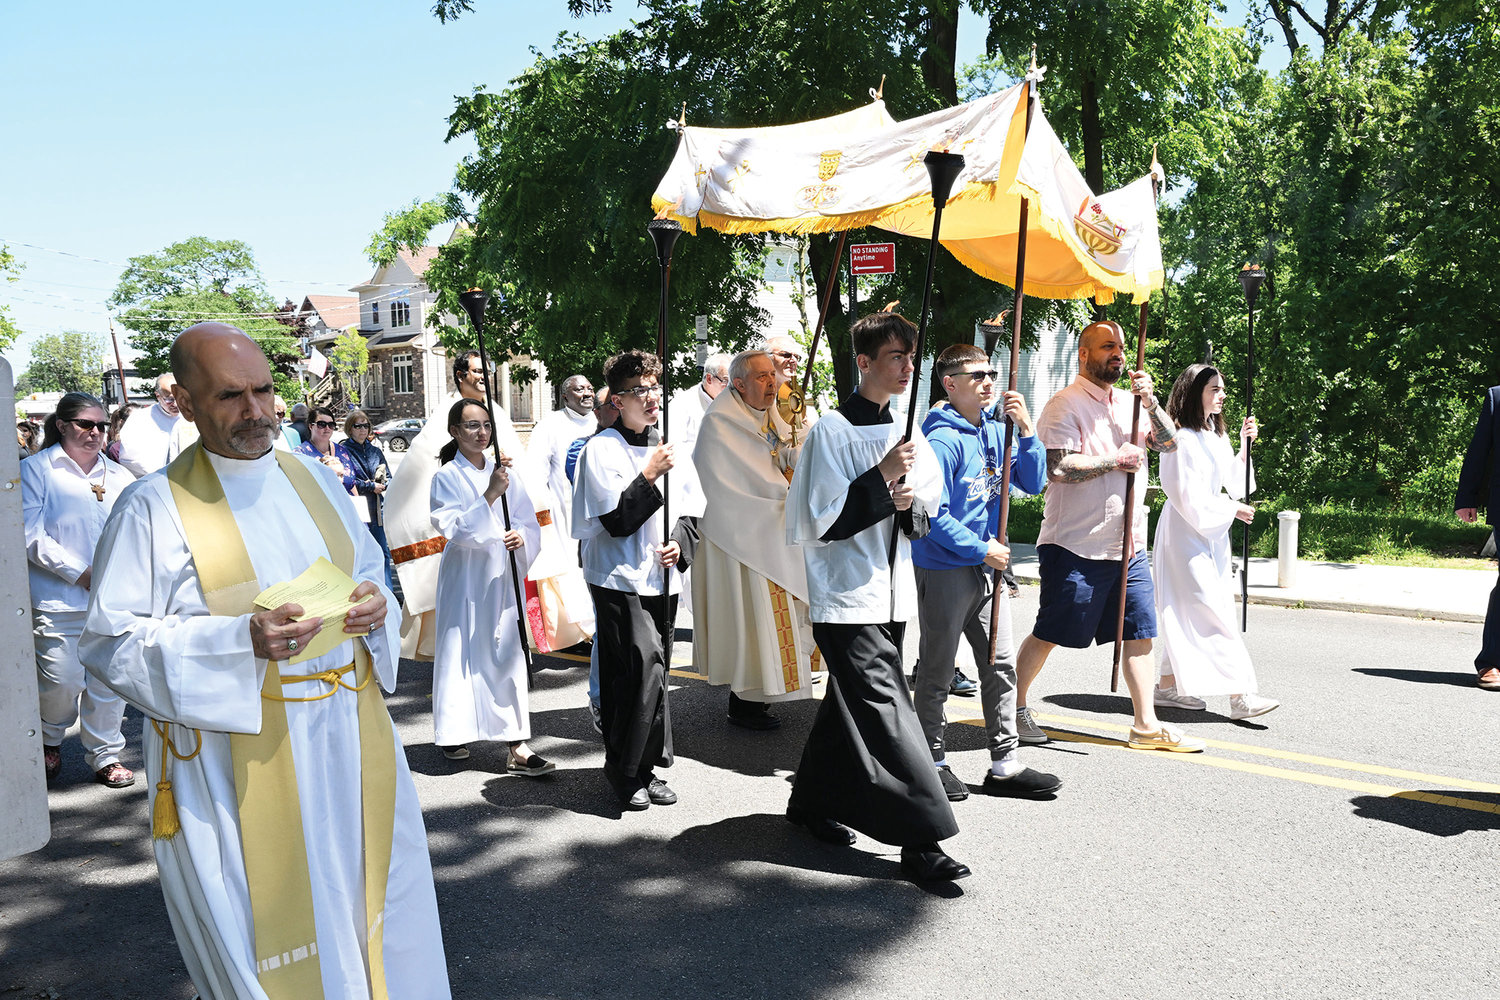 Father Arthur Mastrolia, pastor of St. Clare parish, Staten Island, far left, participates with his parishioners in a neighborhood-wide Corpus Christi procession that followed the 10 a.m. Mass he offered at the church June 19. Deacon Richard Mitchell, a permanent deacon of the parish, carries the monstrance that contains the Blessed Sacrament to the fourth altar station along the procession route.